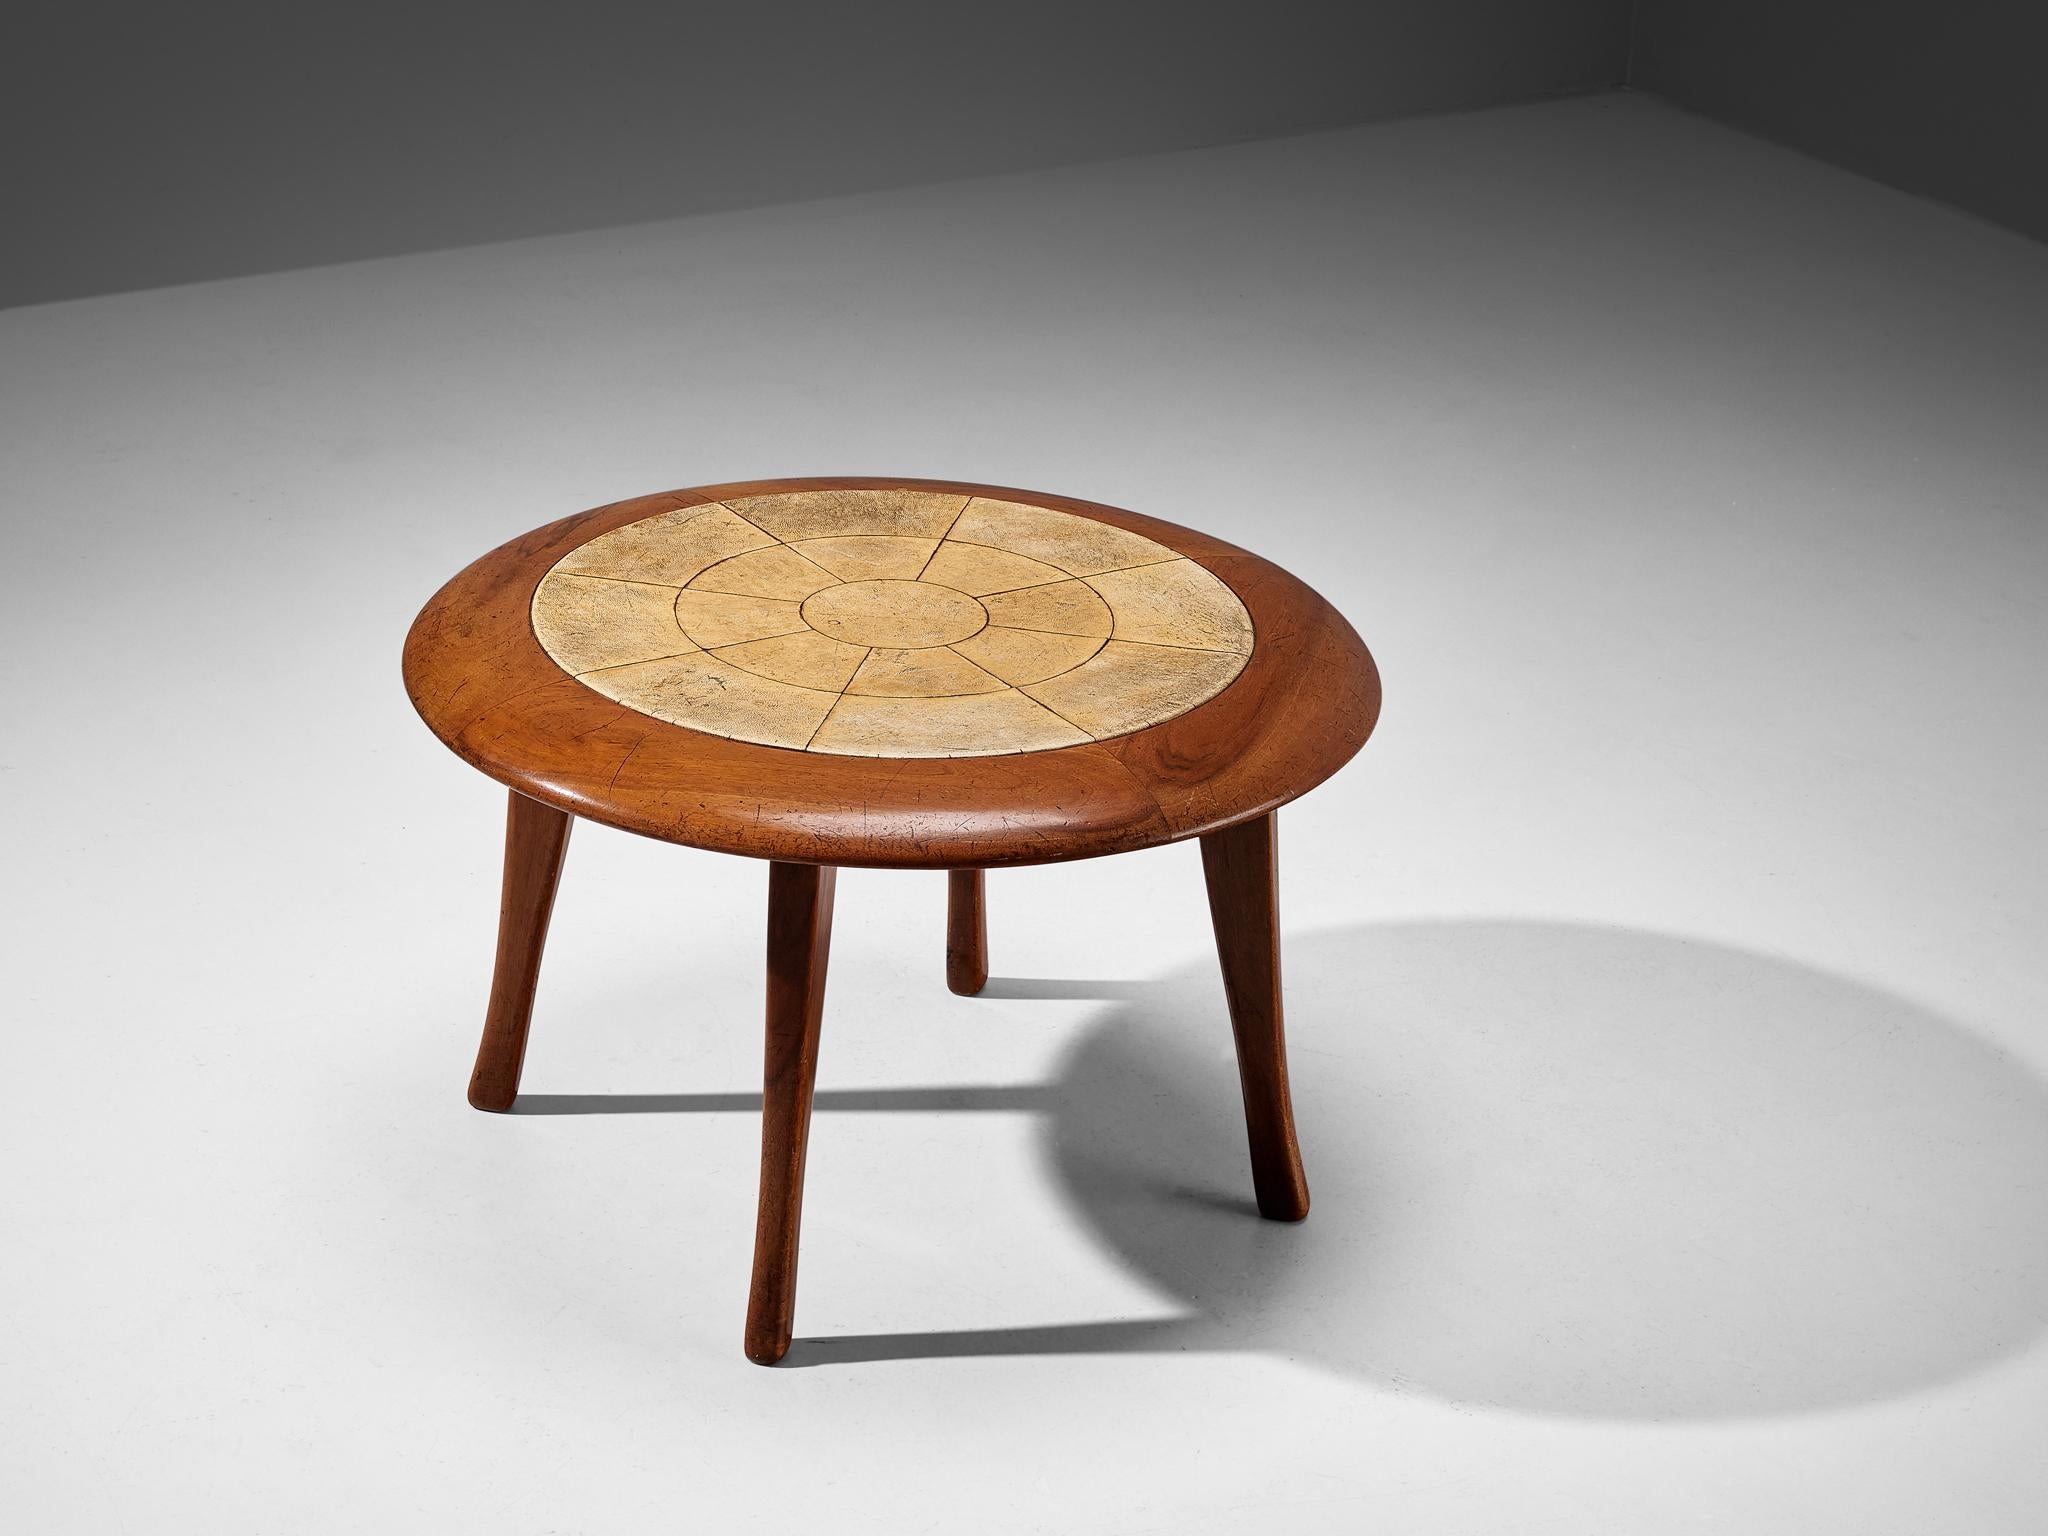 Guglielmo Ulrich, coffee table, sand-colored parchment, walnut, Italy, circa 1940

Stately and elegant coffee table designed by Italian master Guglielmo Ulrich around 1940. This table has a beautiful inlay of parchment on top of the table. The wood